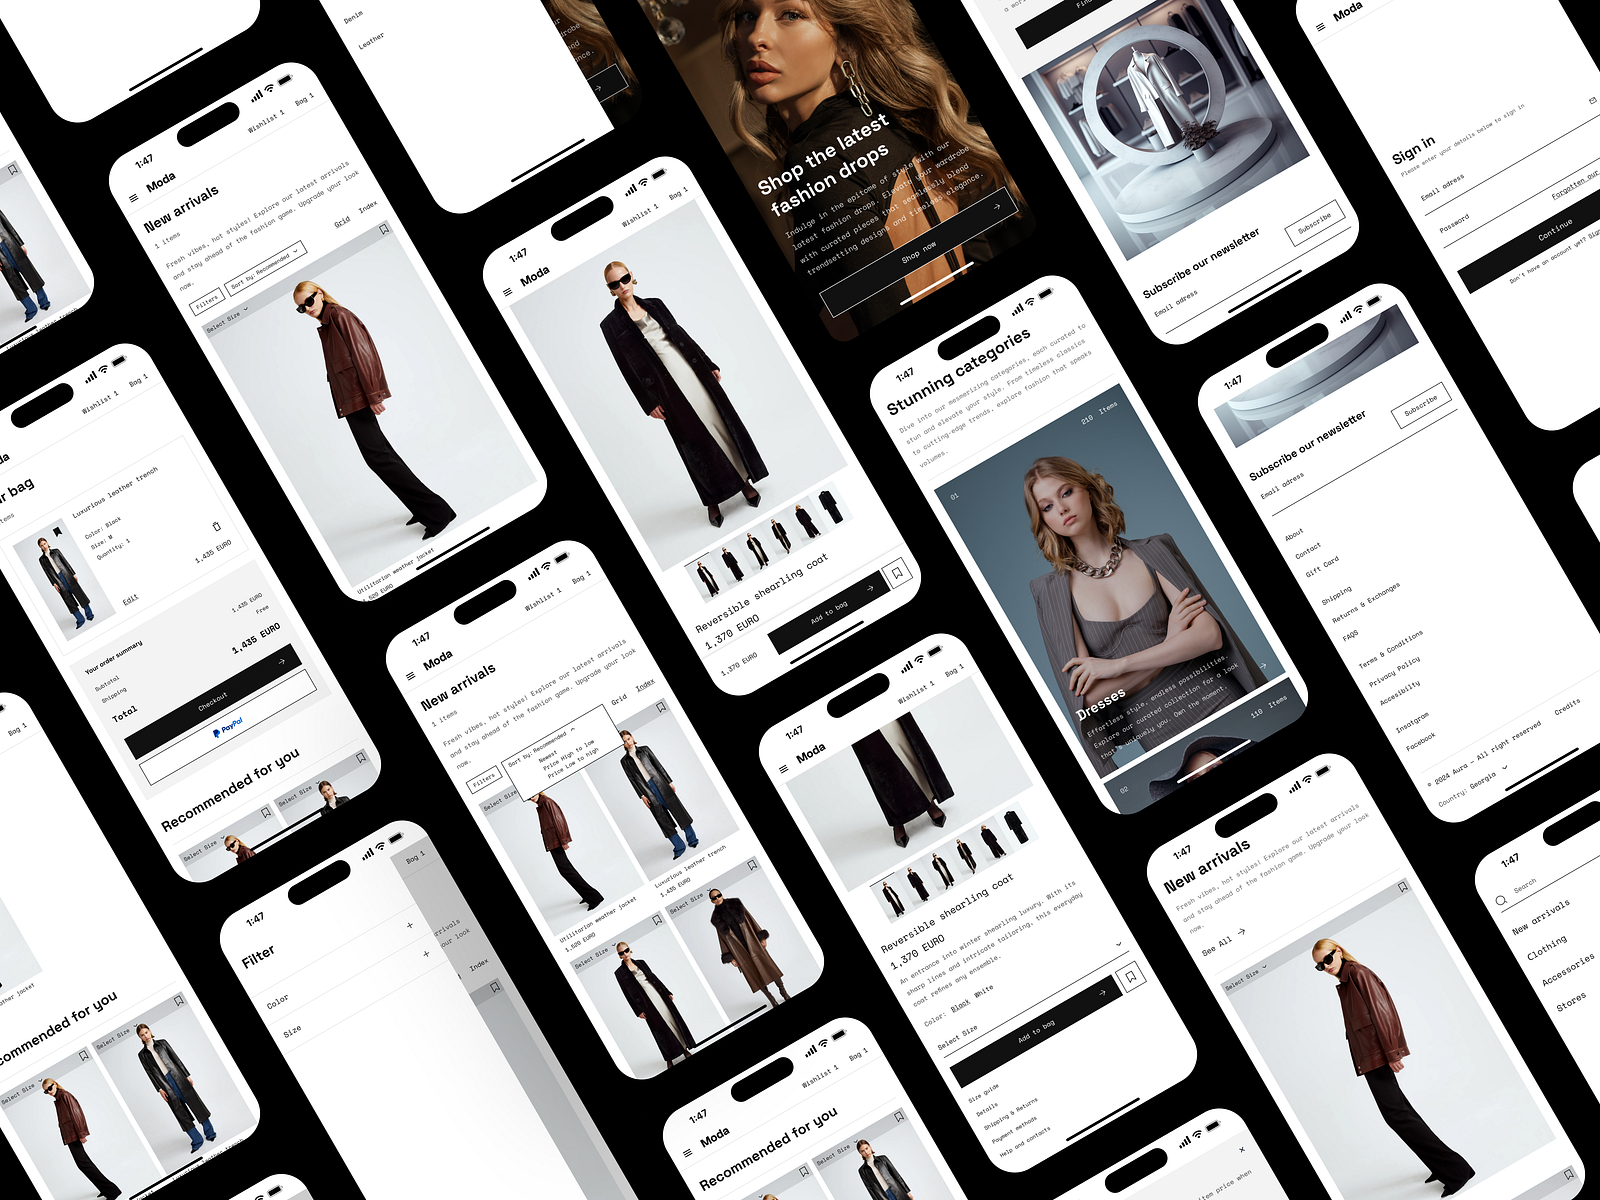 Moda - Fashion responsive mobile app by George Chichua on Dribbble